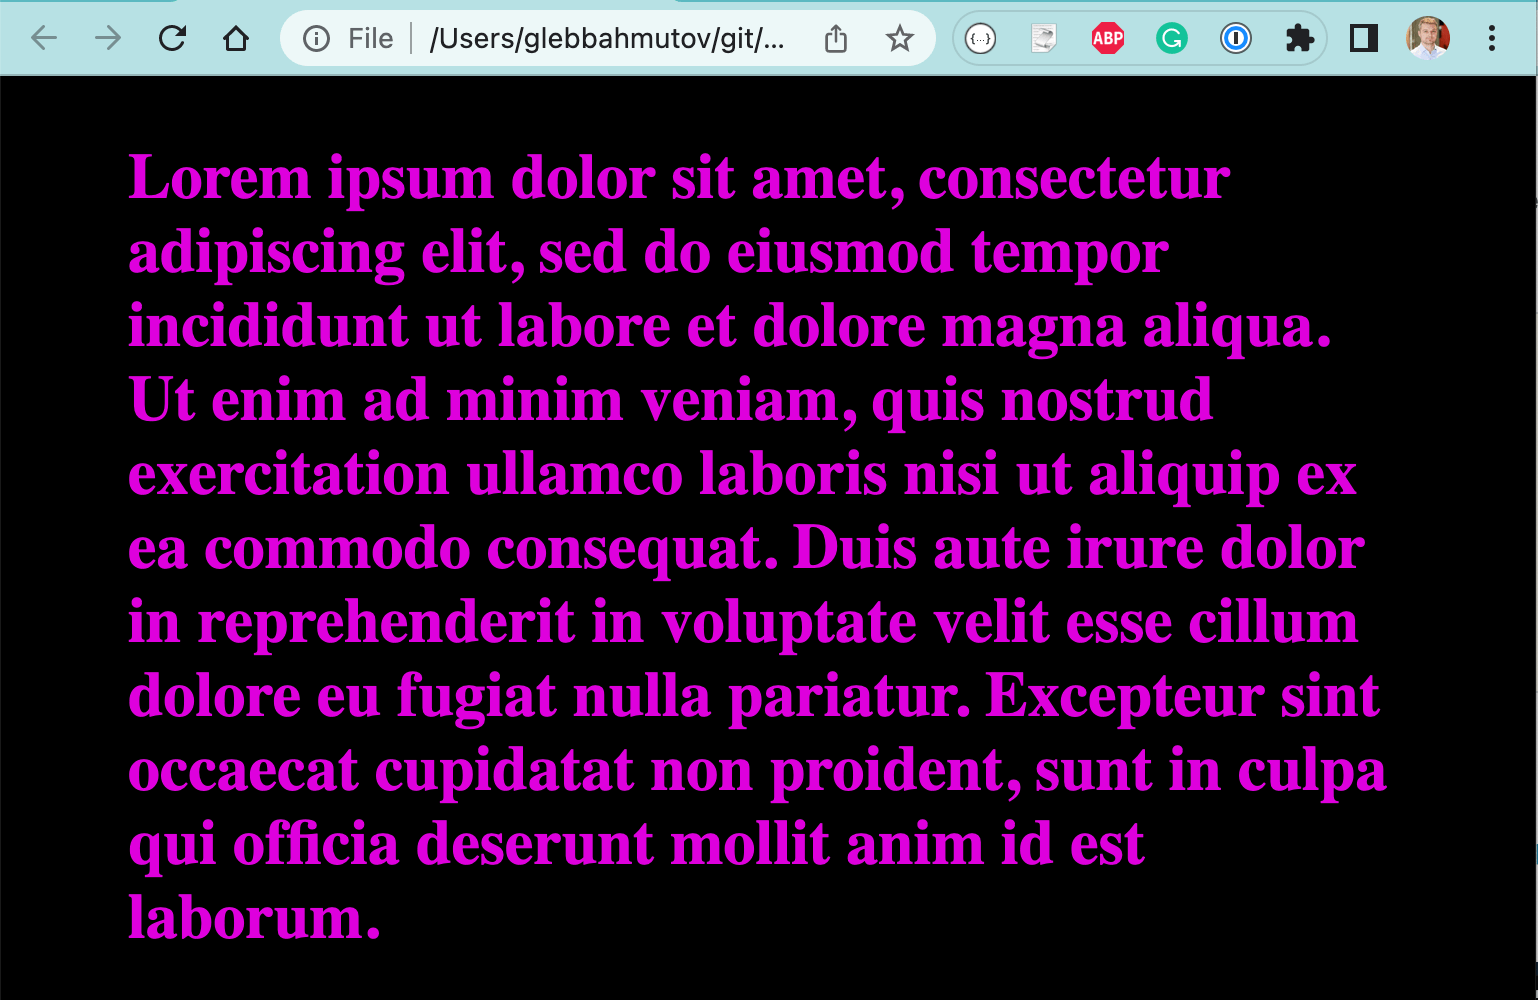 The page shown in the browser that prefers the dark color scheme